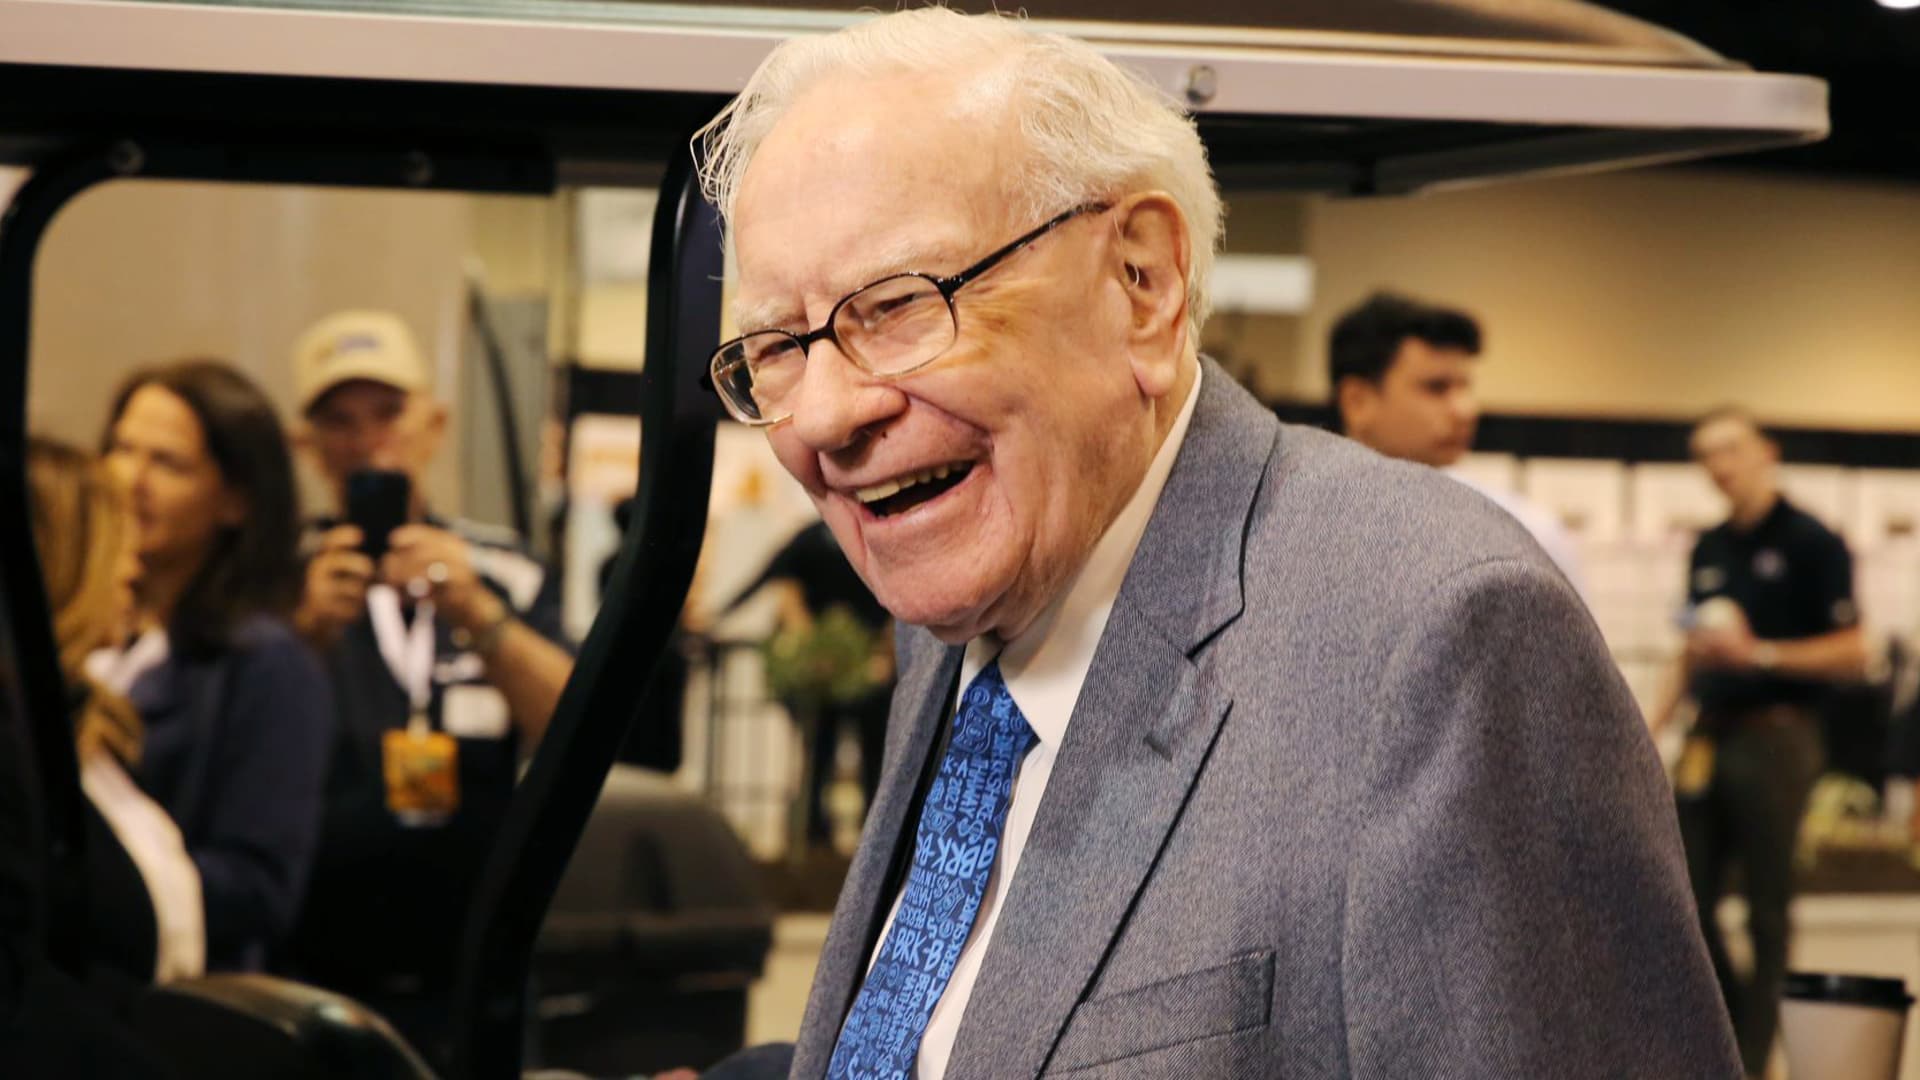 Berkshire shares slip after hitting all-time high on big profit gain